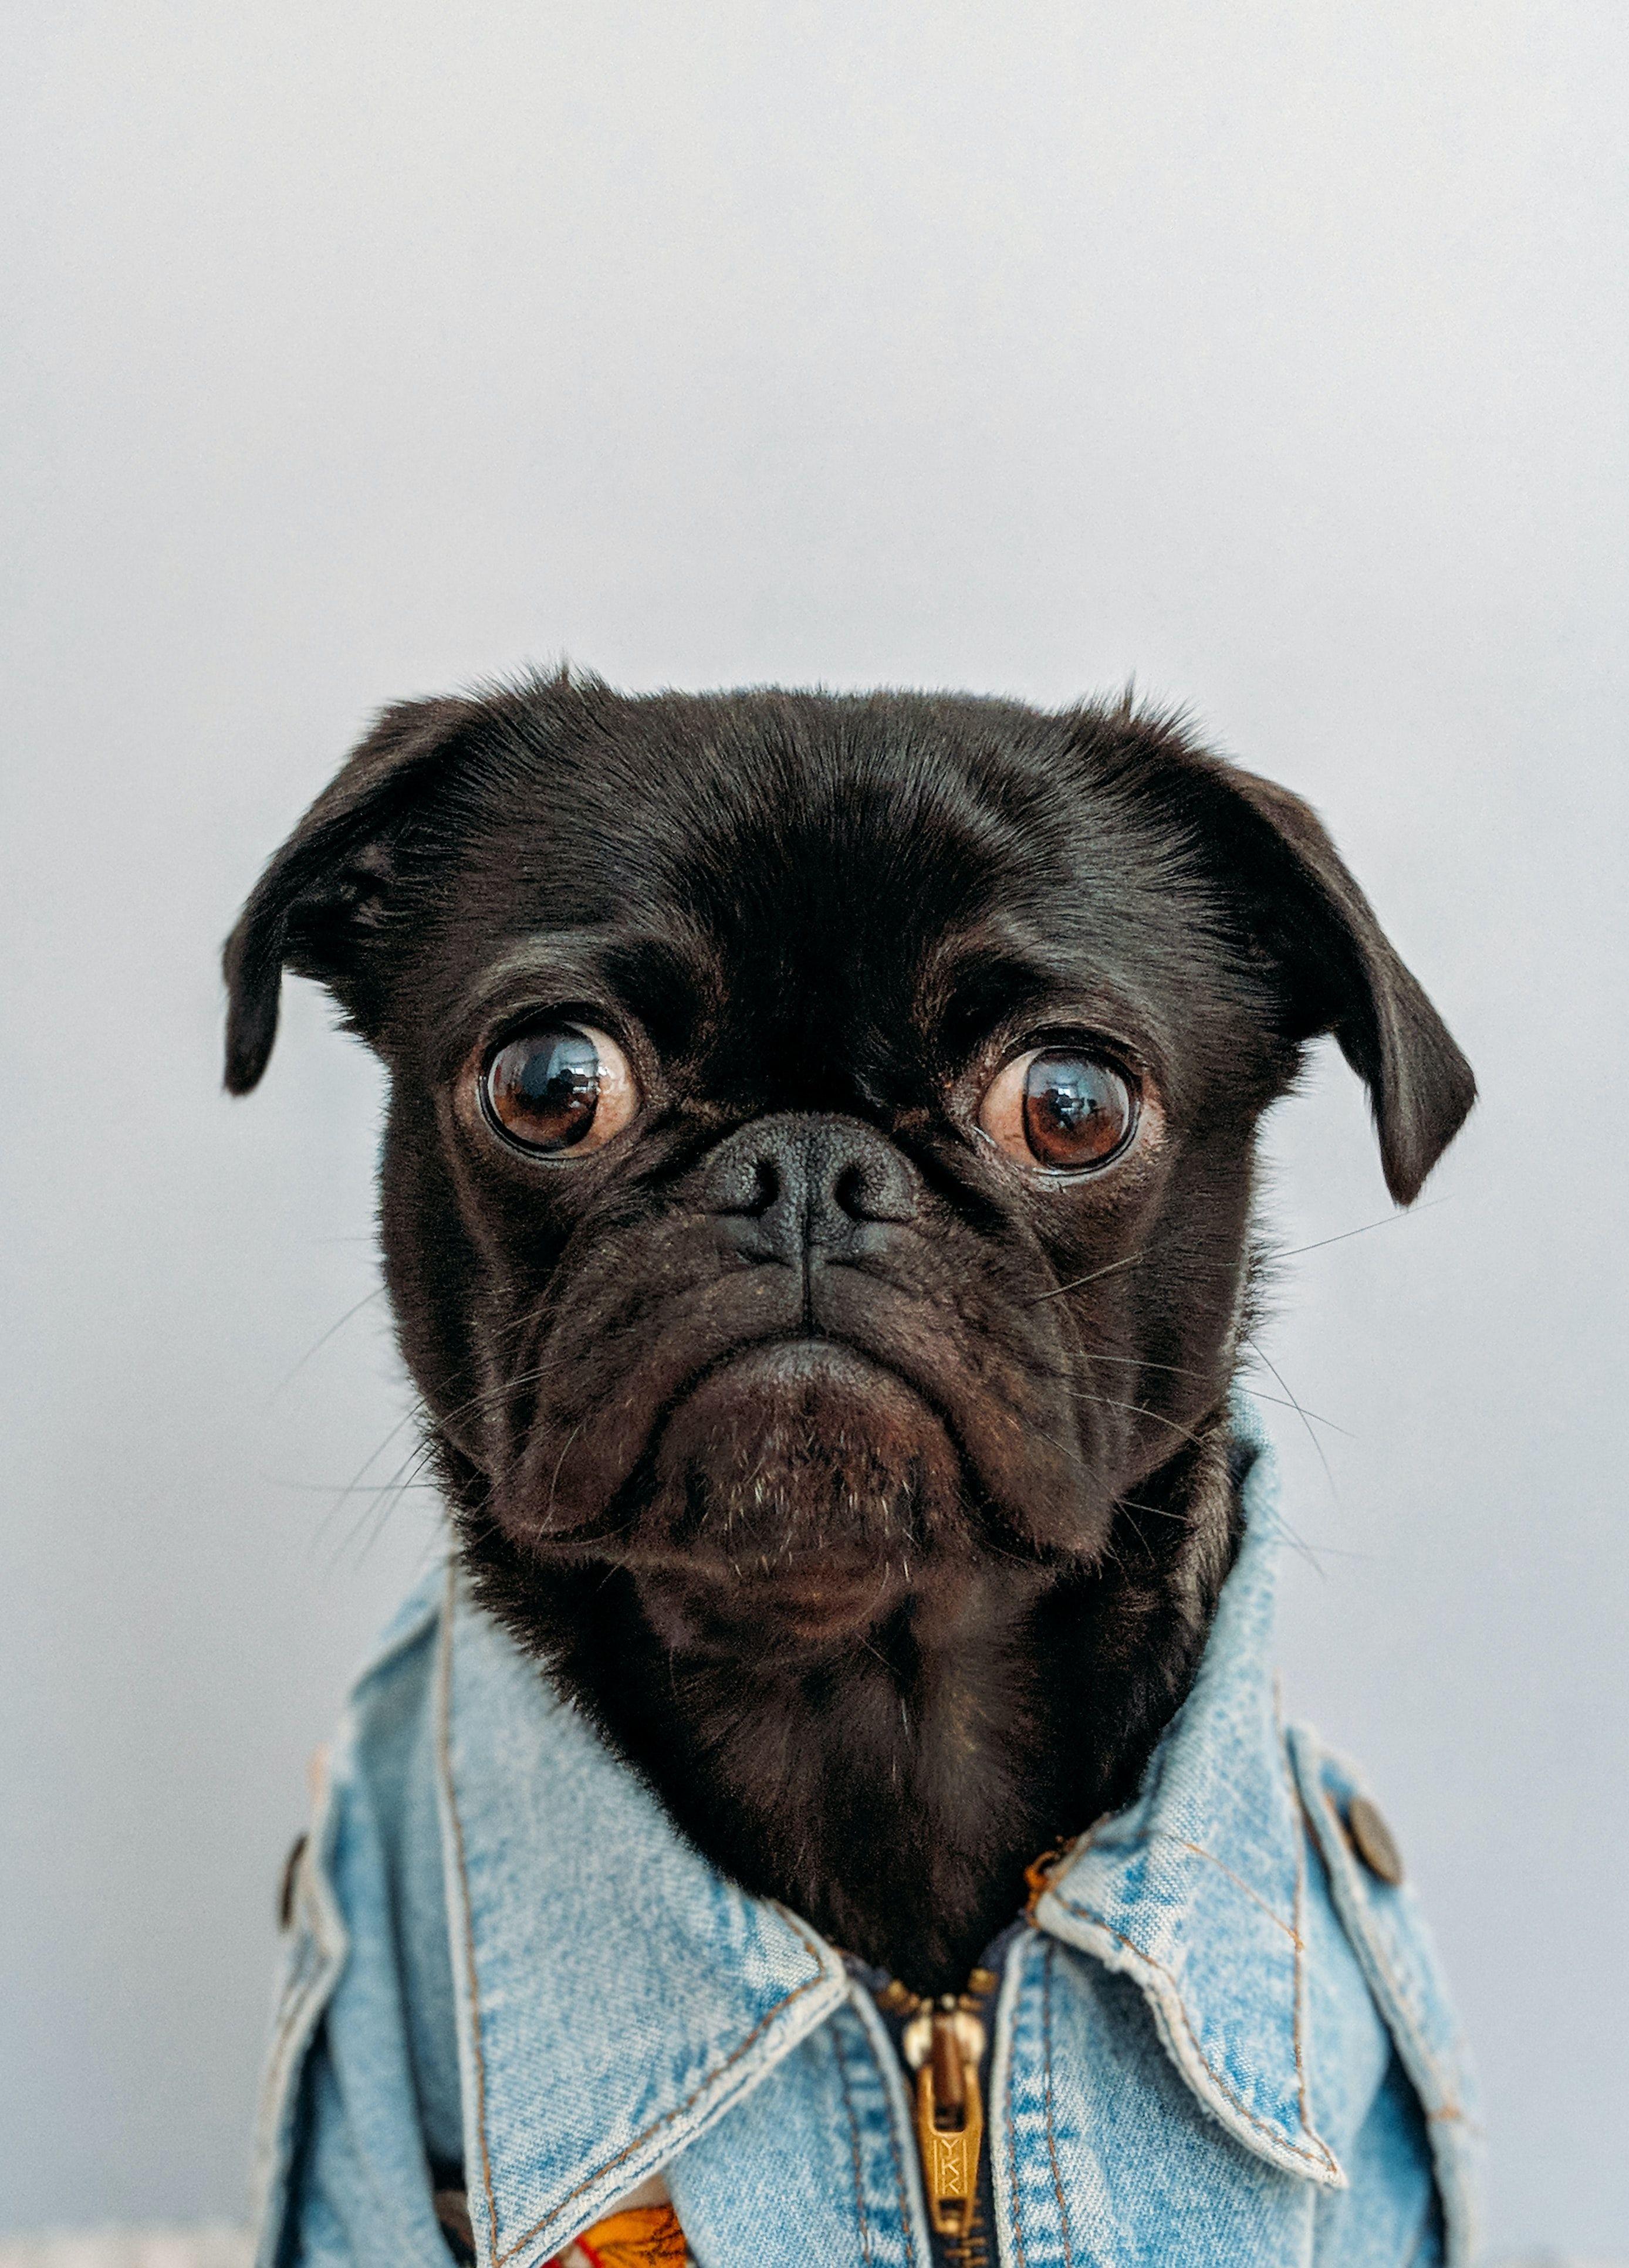 Confused as a pug